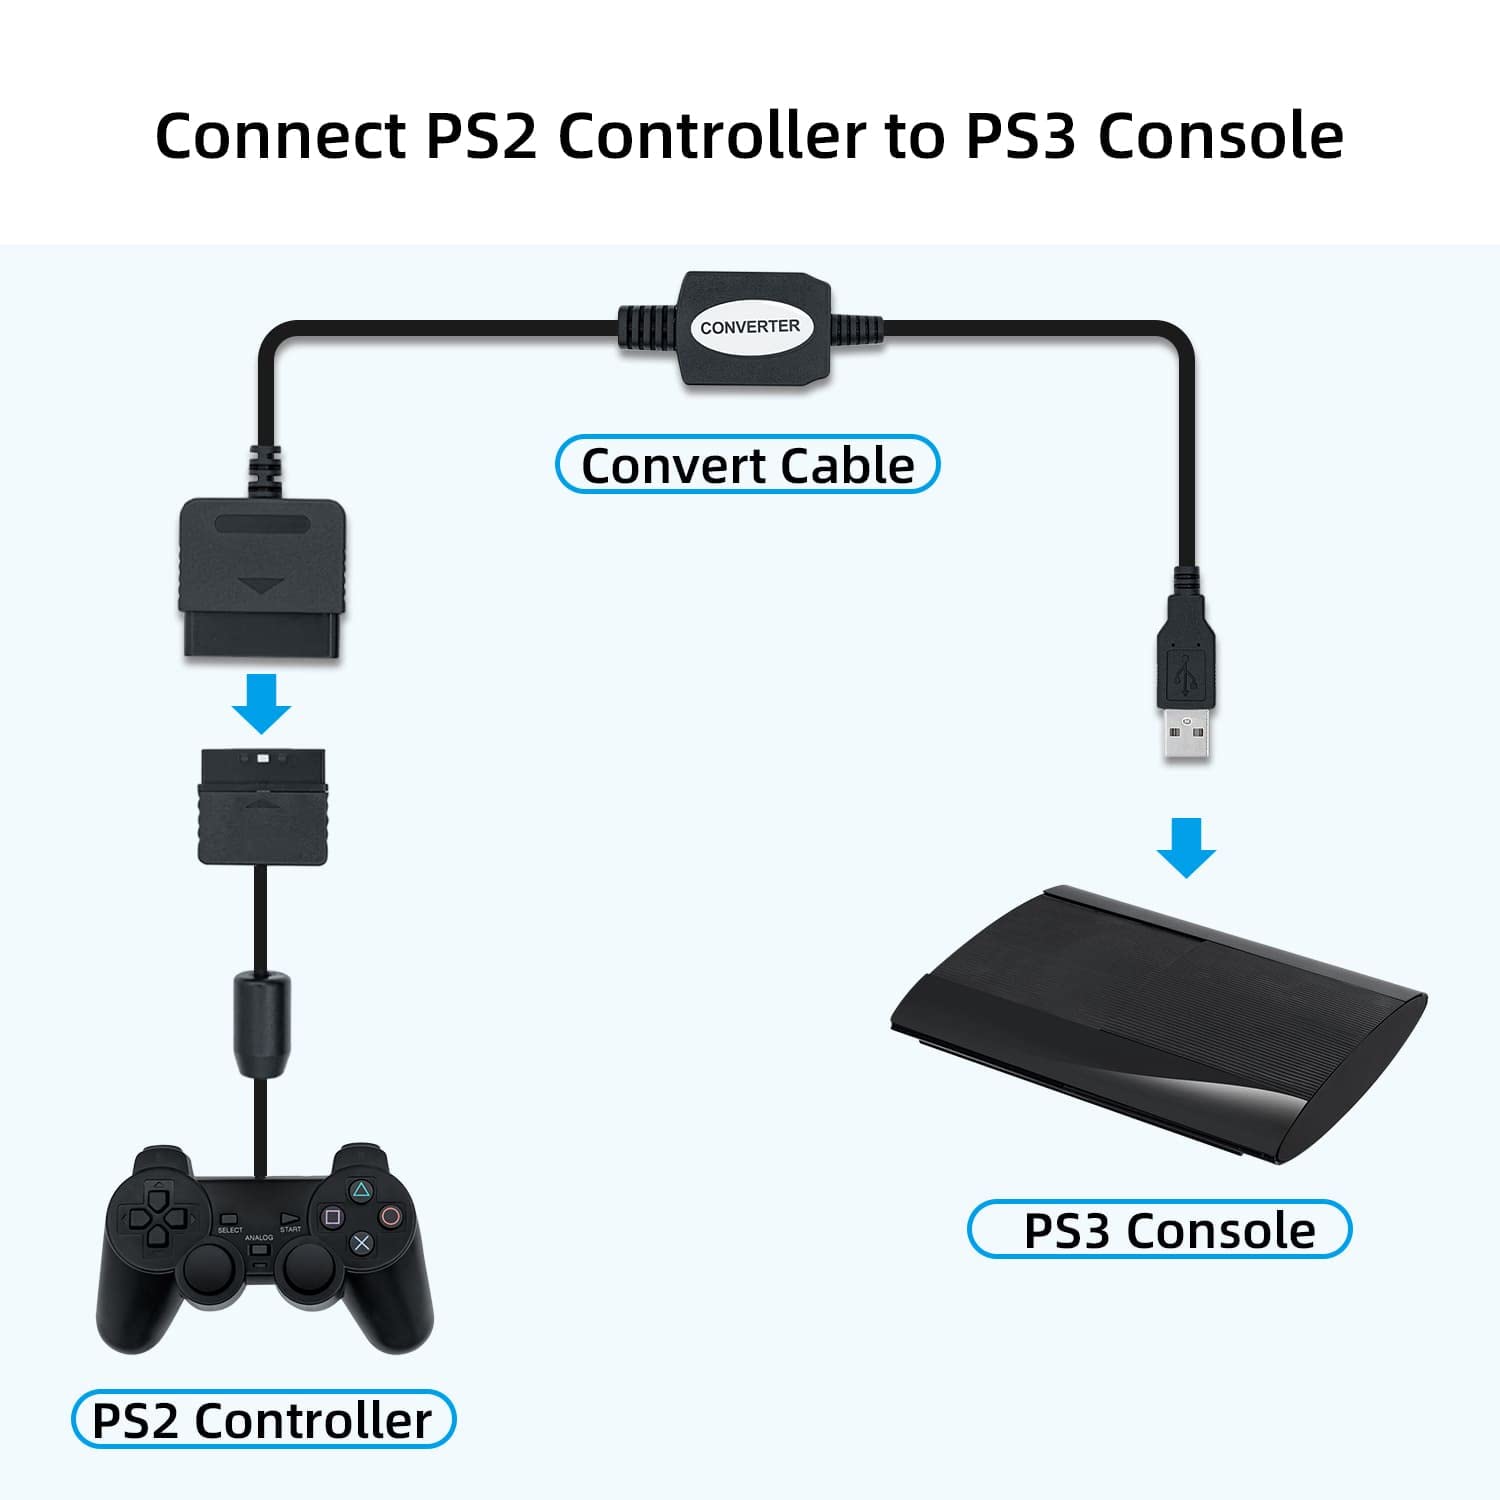 Mcbazel Playstation 2 Controller to USB Adapter for PC or Playstation 3 Converter Cable for Sony DualShock PS2 PS3 Controllers (NOT Compatible with Dancing Mat Guitar Hero)